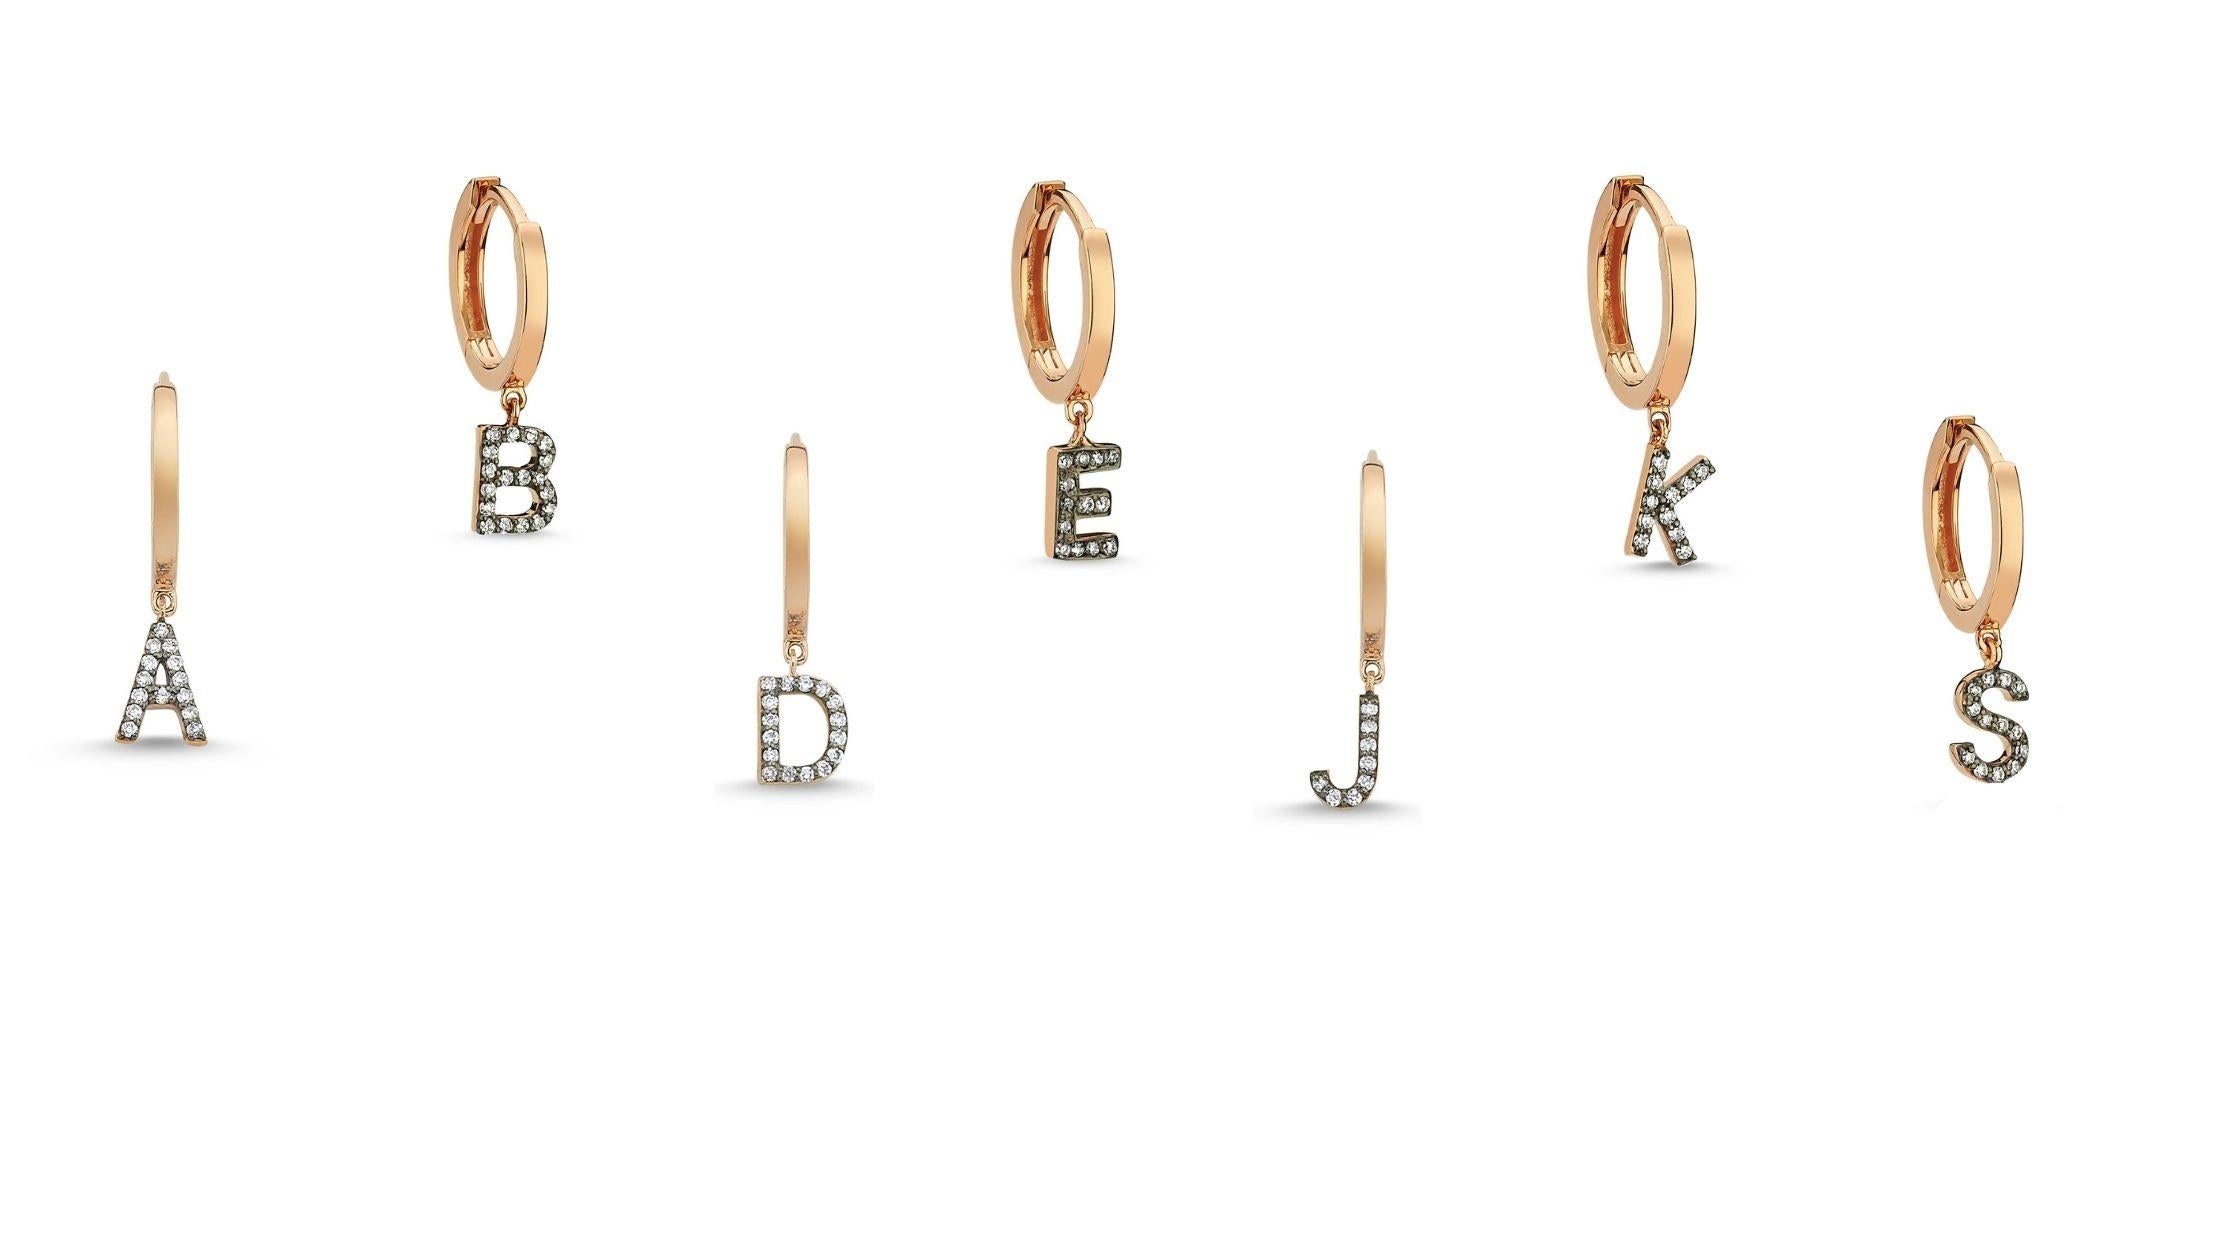 Letter K (single) 14k rose gold earring with white diamond by Selda Jewellery

Additional Information:-
Collection: Letter Collection
14k Rose gold
0.04ct White diamond
Letter height 1cm